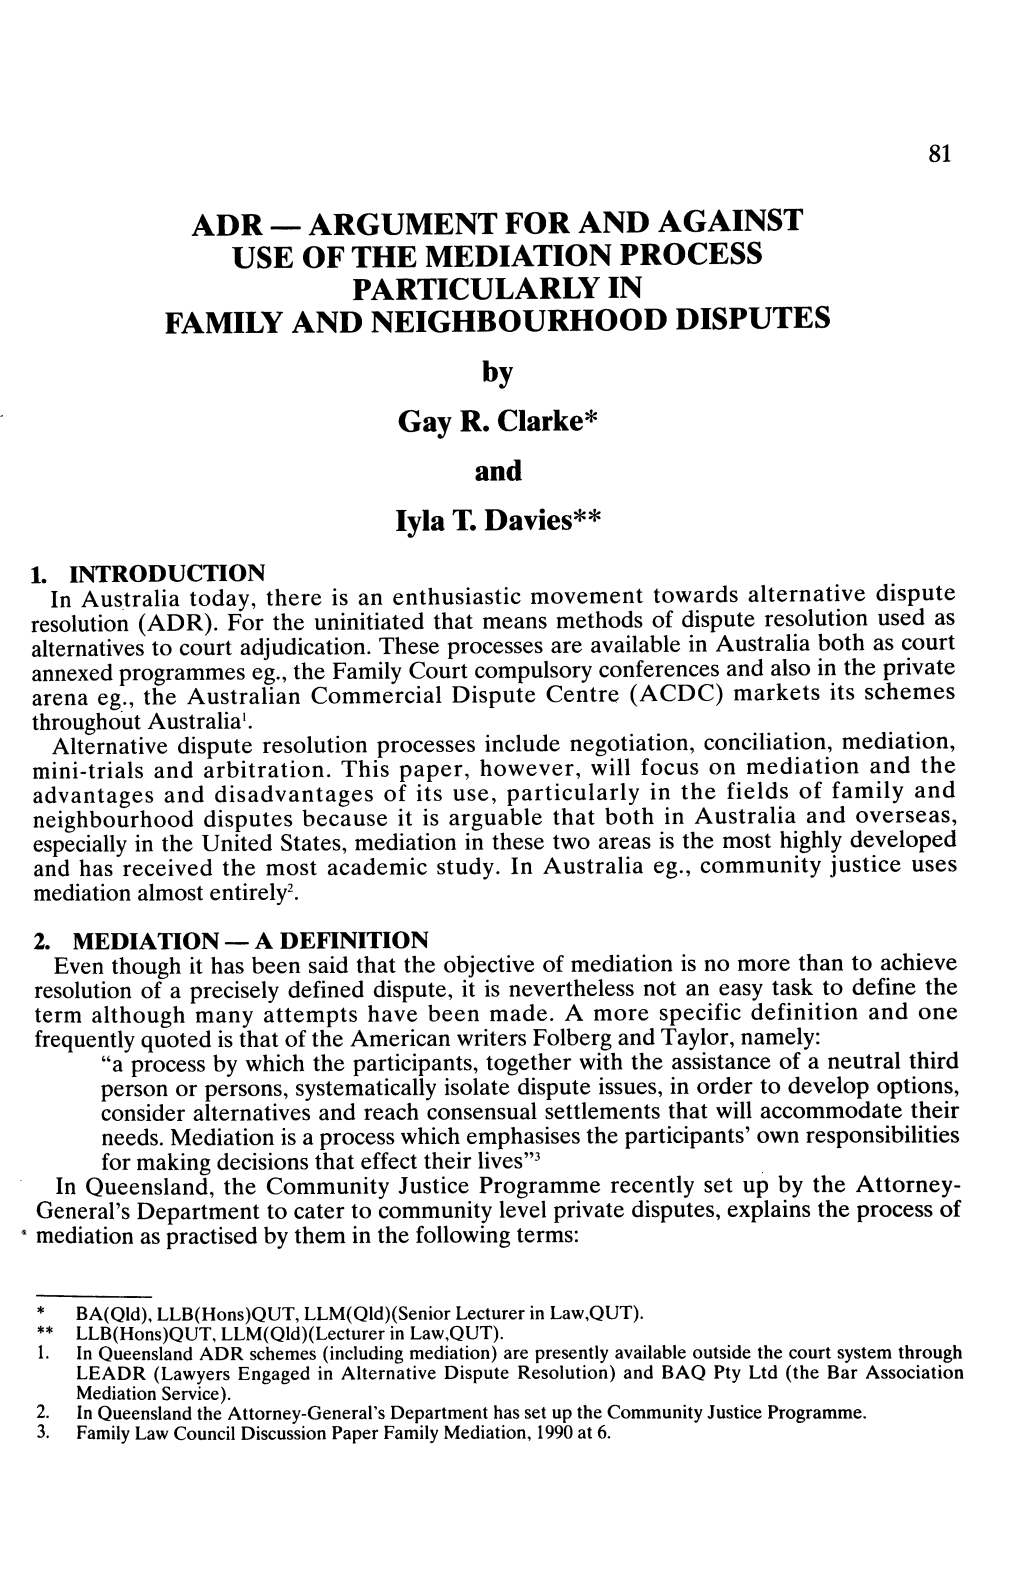 Adr — Argument for and Against Use of the Mediation Process Particularly in Family and Neighbourhood Disputes